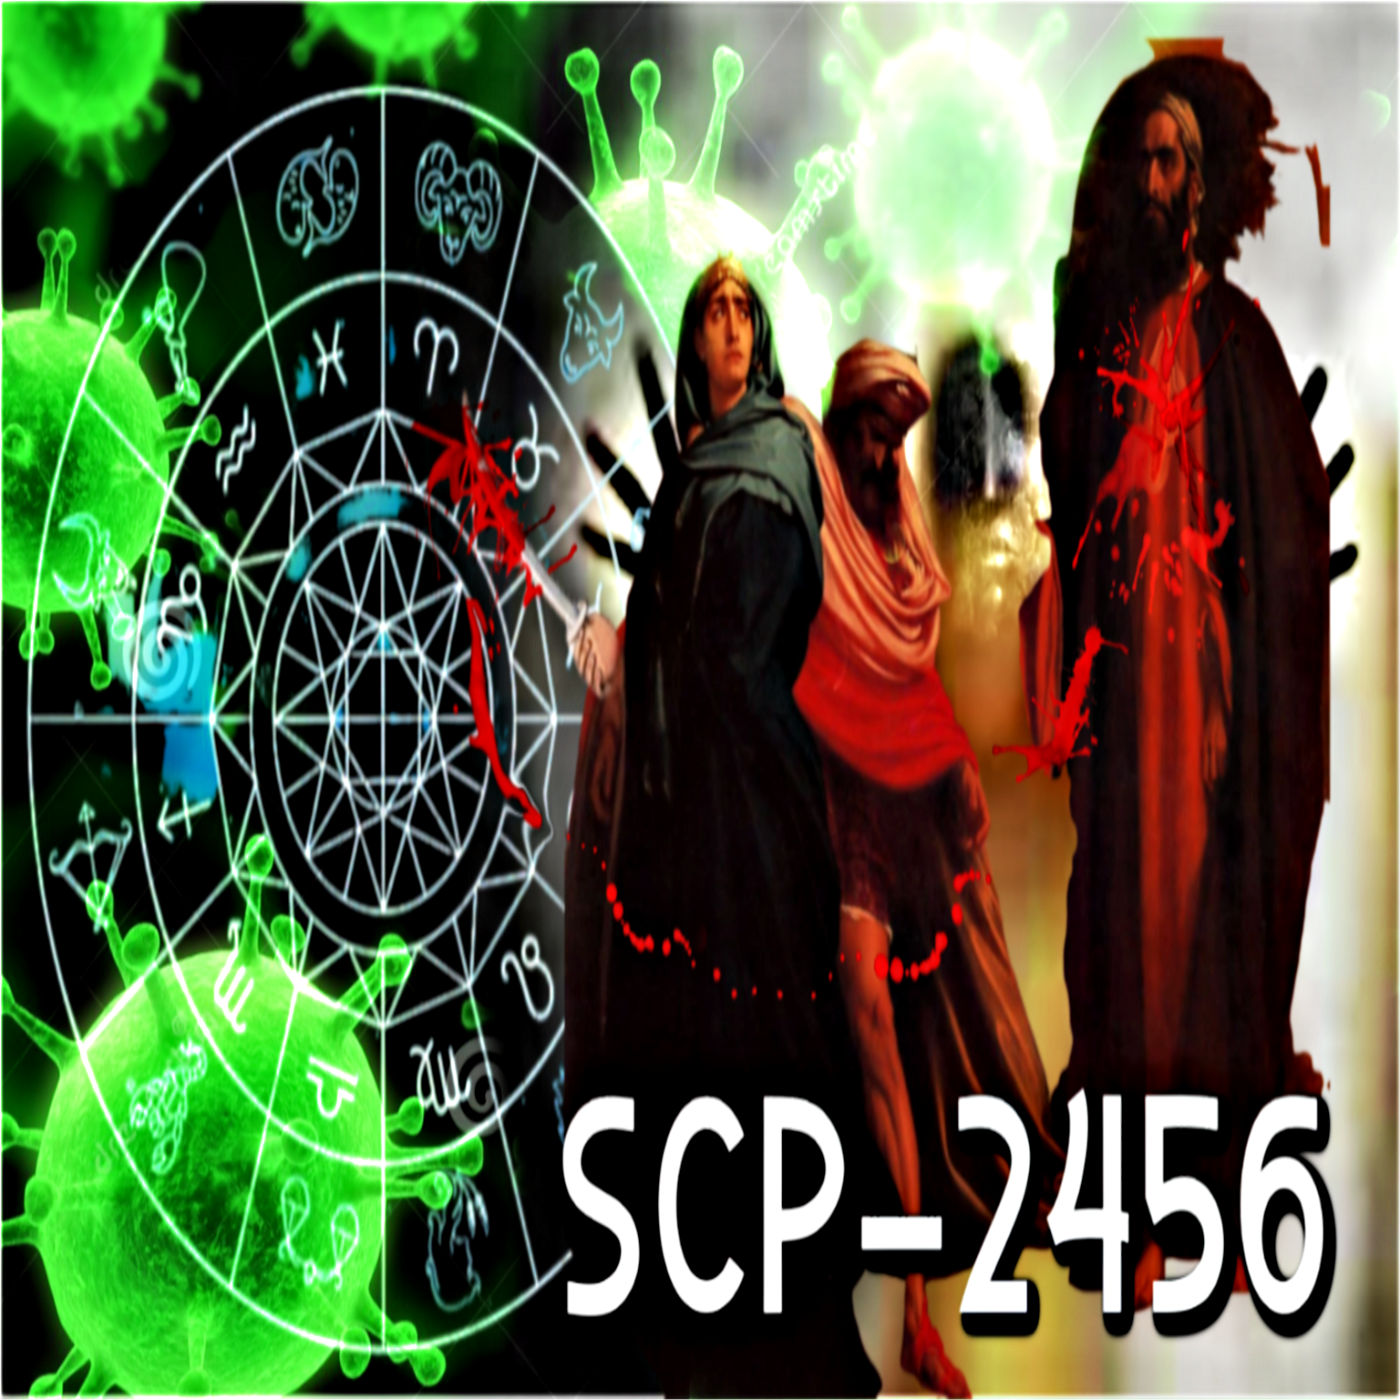 SCP 2456. 